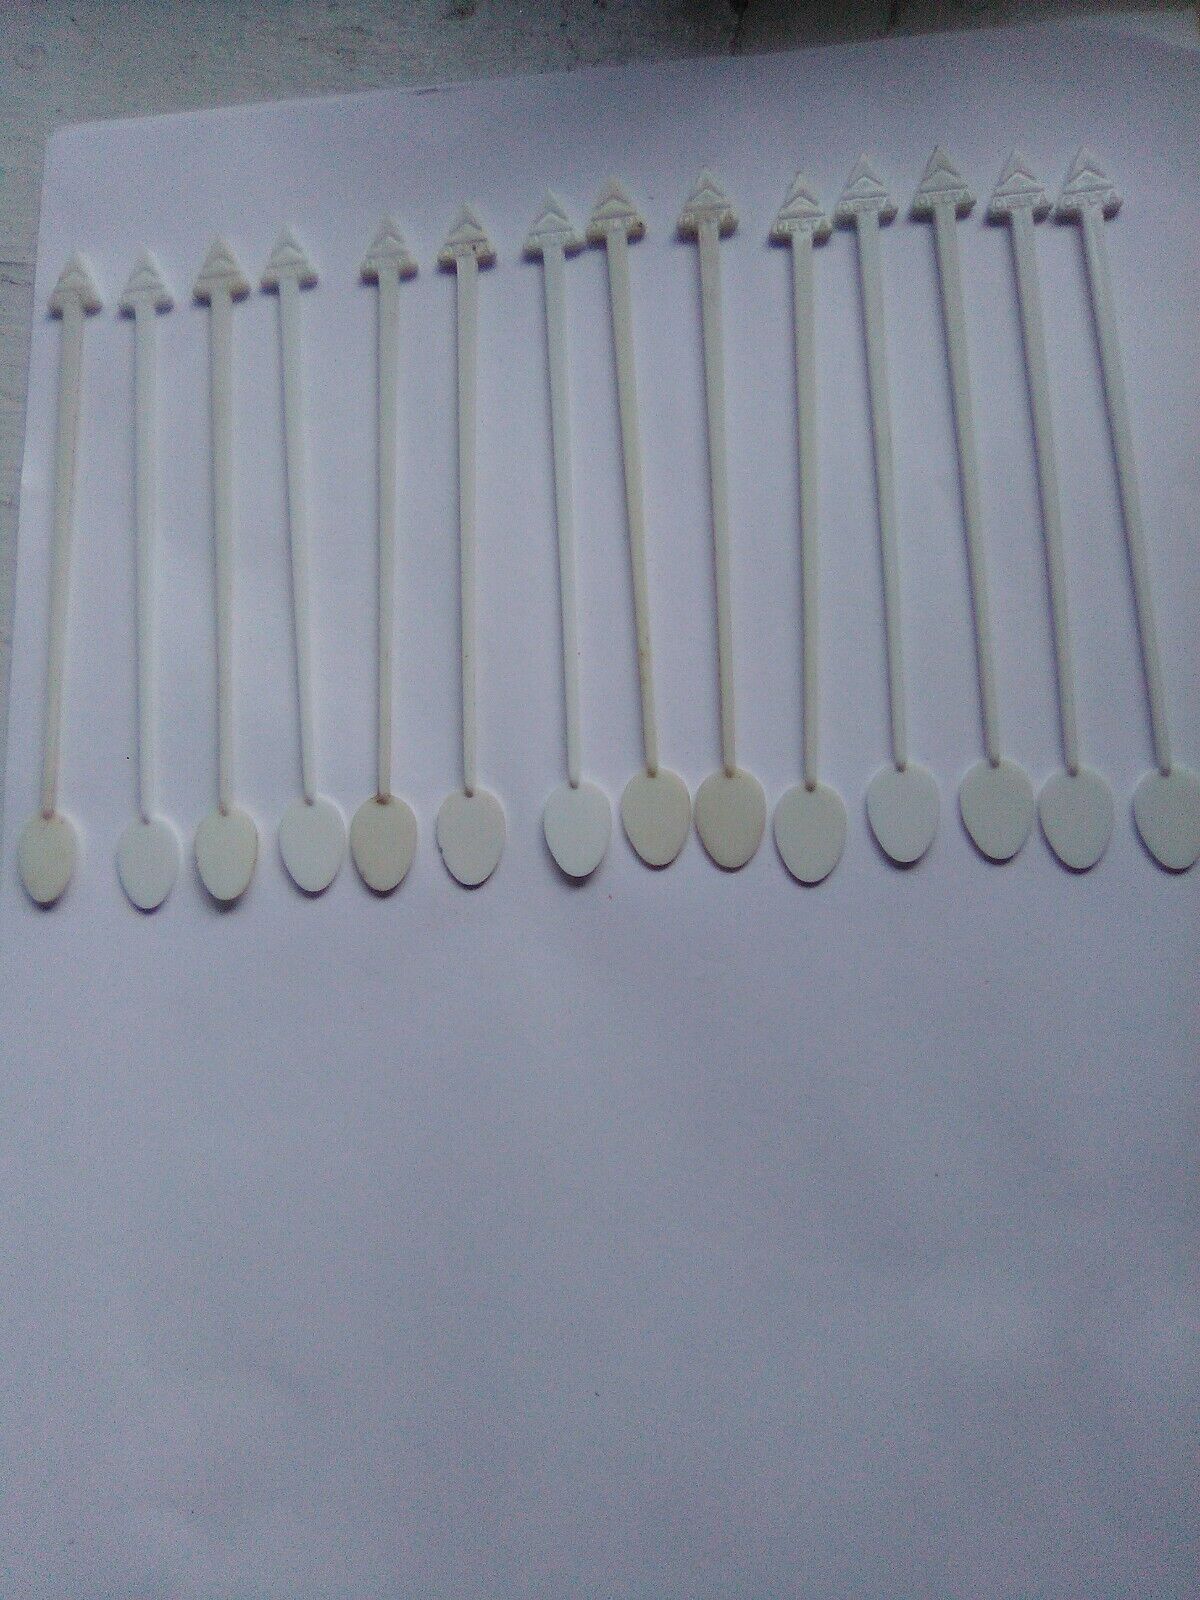 14 Delta Airlines Swizzle Sticks Drink Stirrers FLAT Spoons White plastic. 